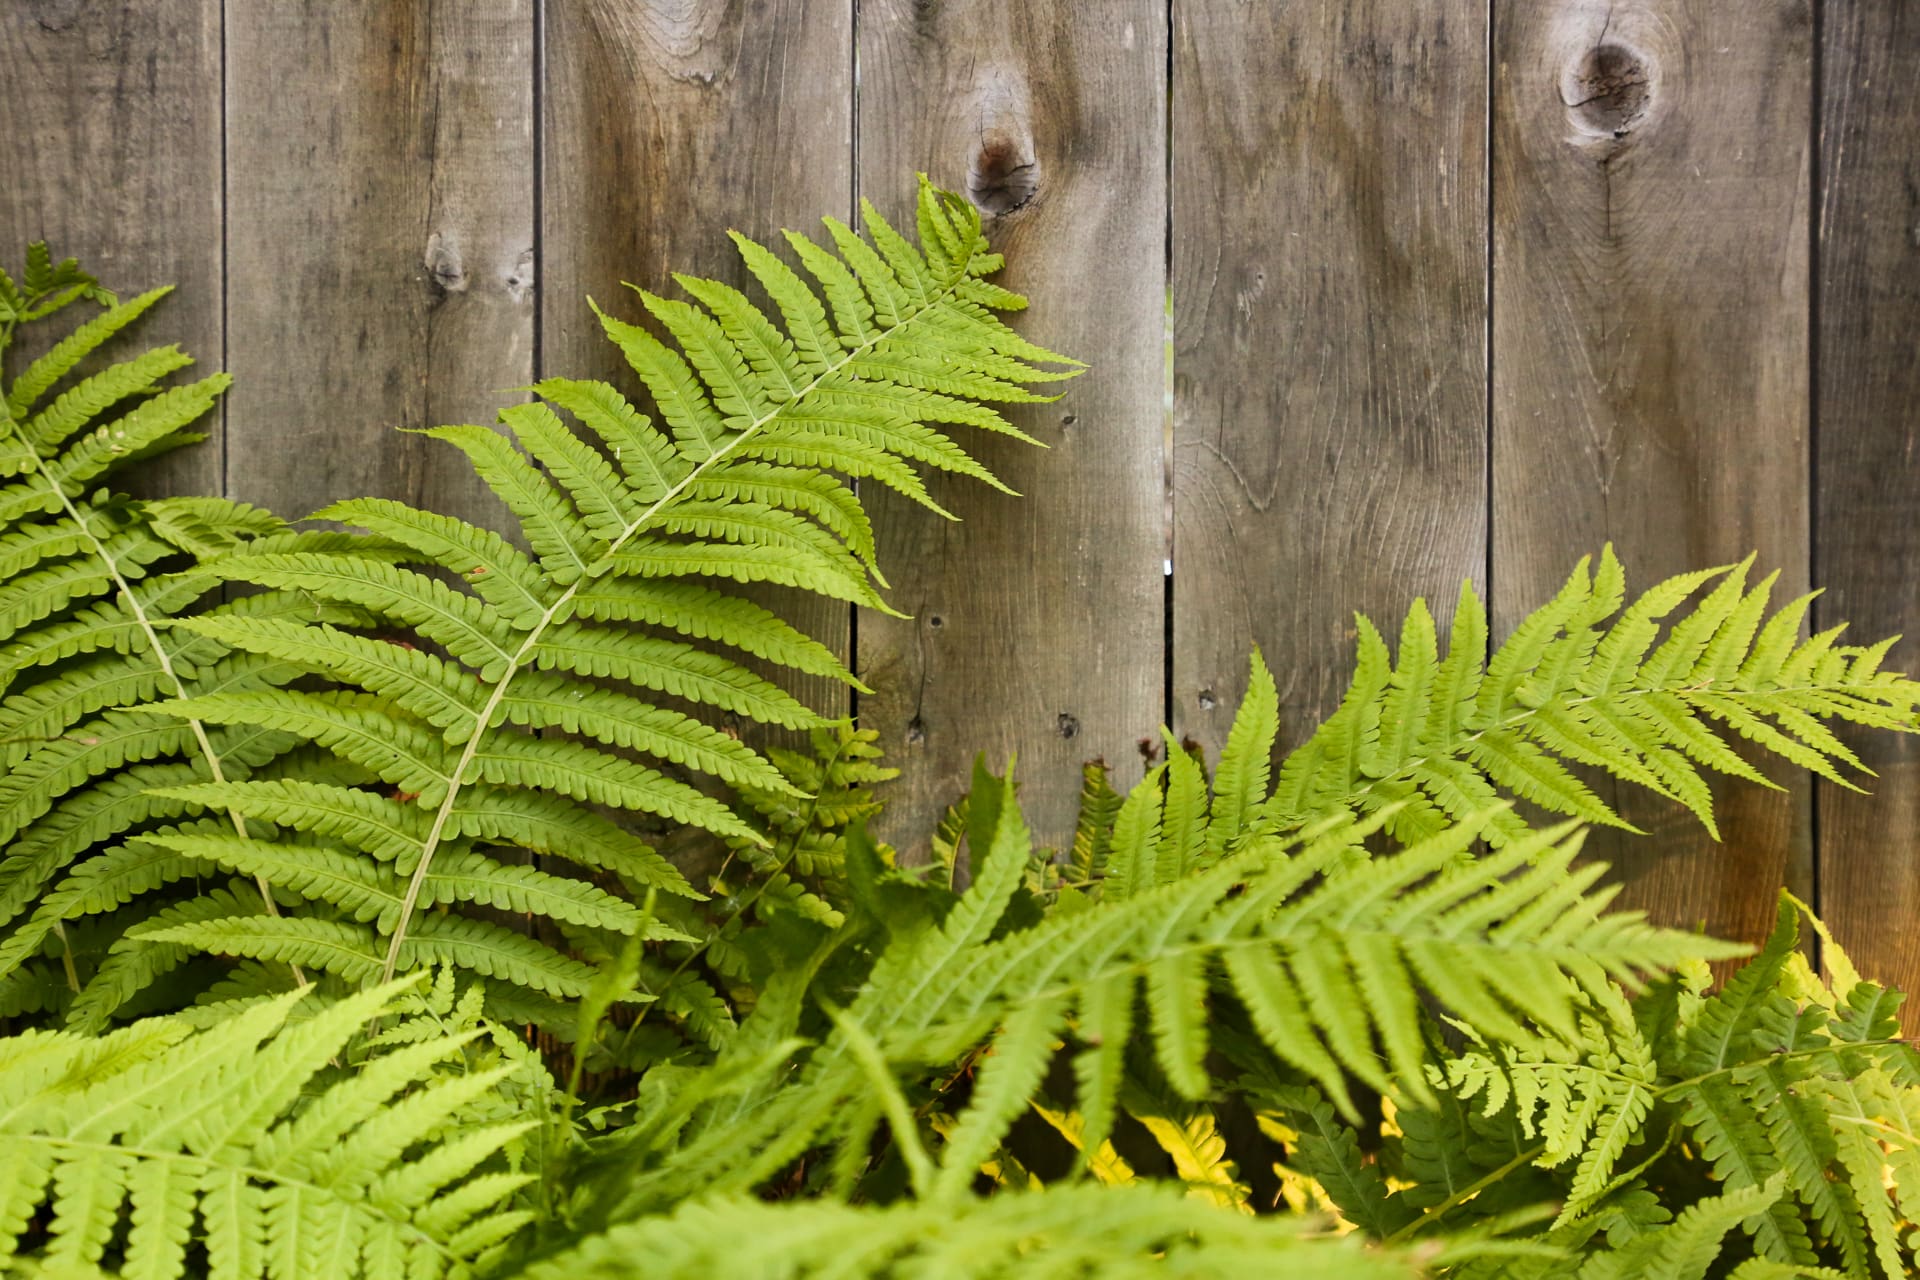 A photo of ferns against a weathered wooden fence.